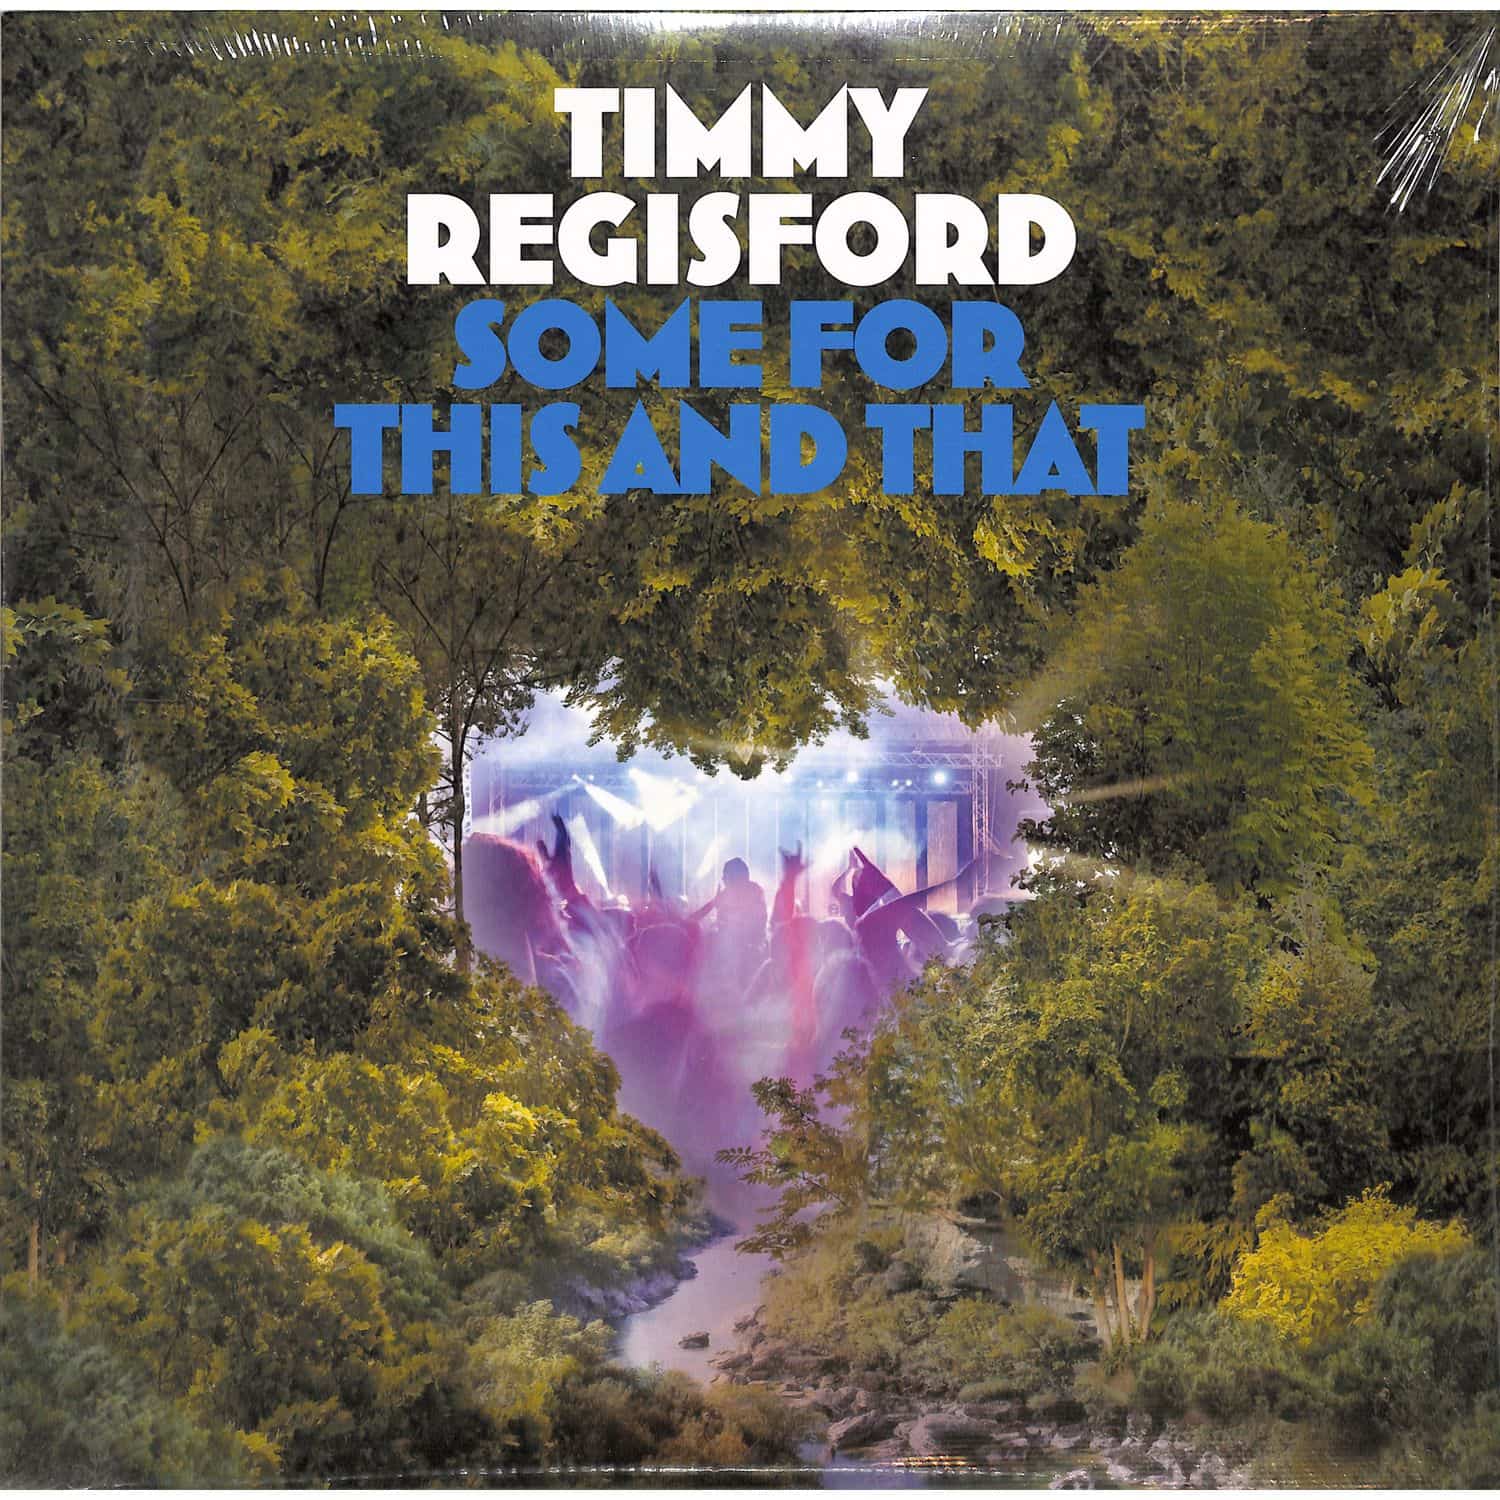 Timmy Regisford - SOME FOR THIS AND THAT 